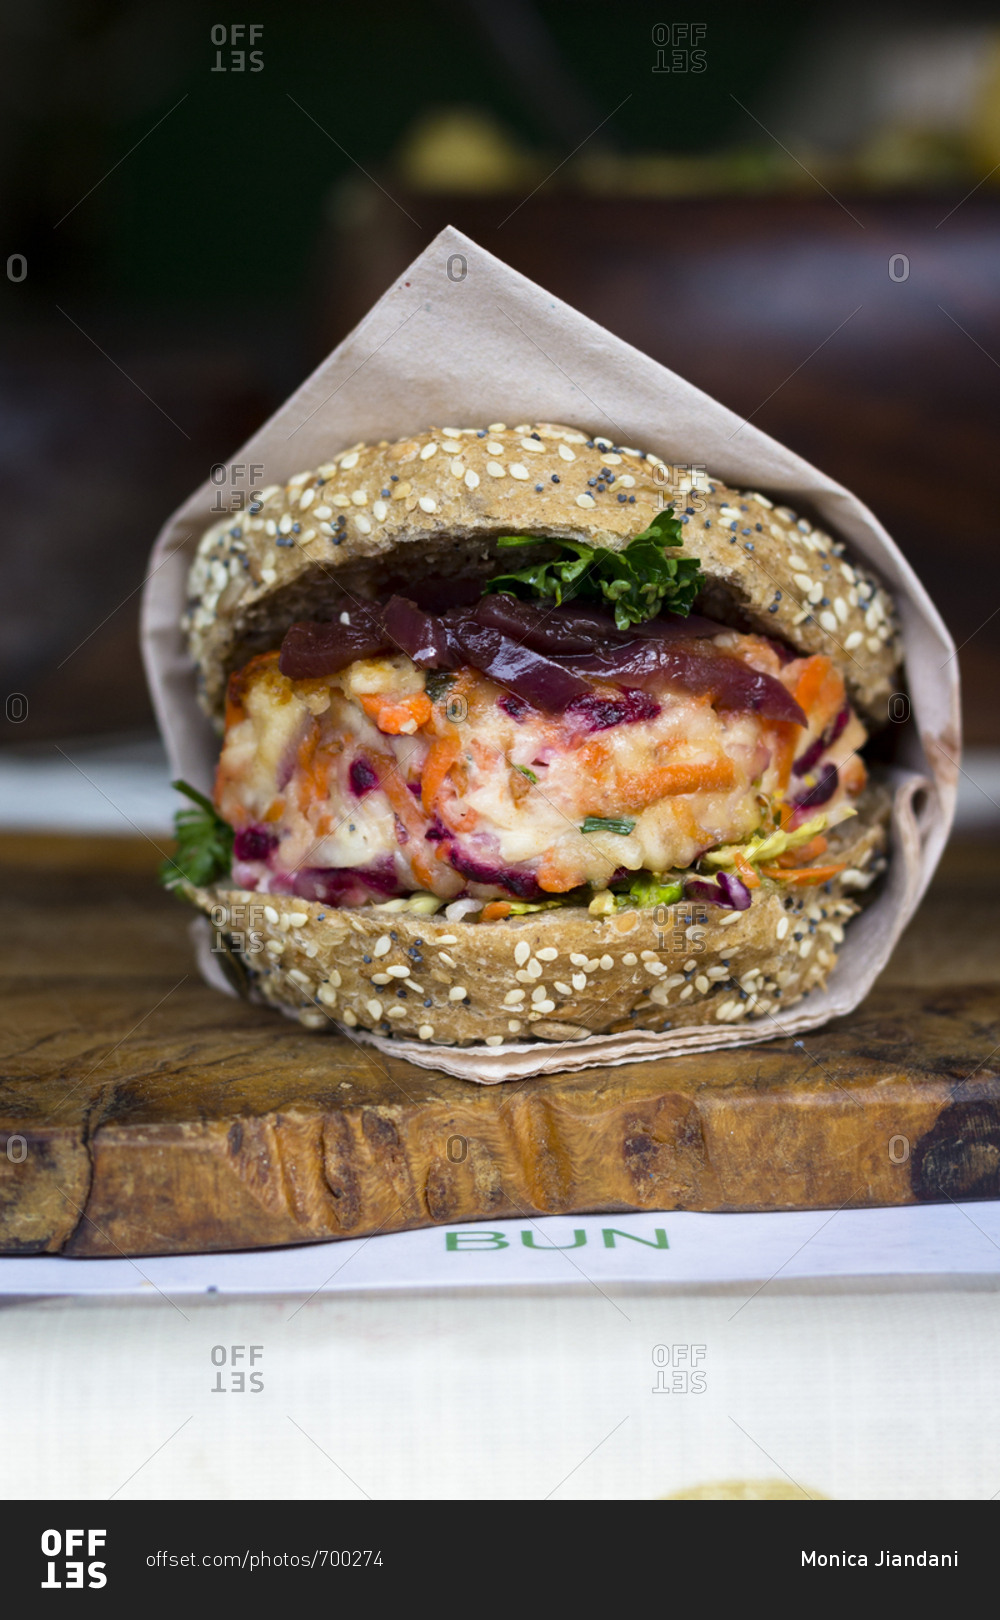 Veggie burger in a stall in borough market, london, england